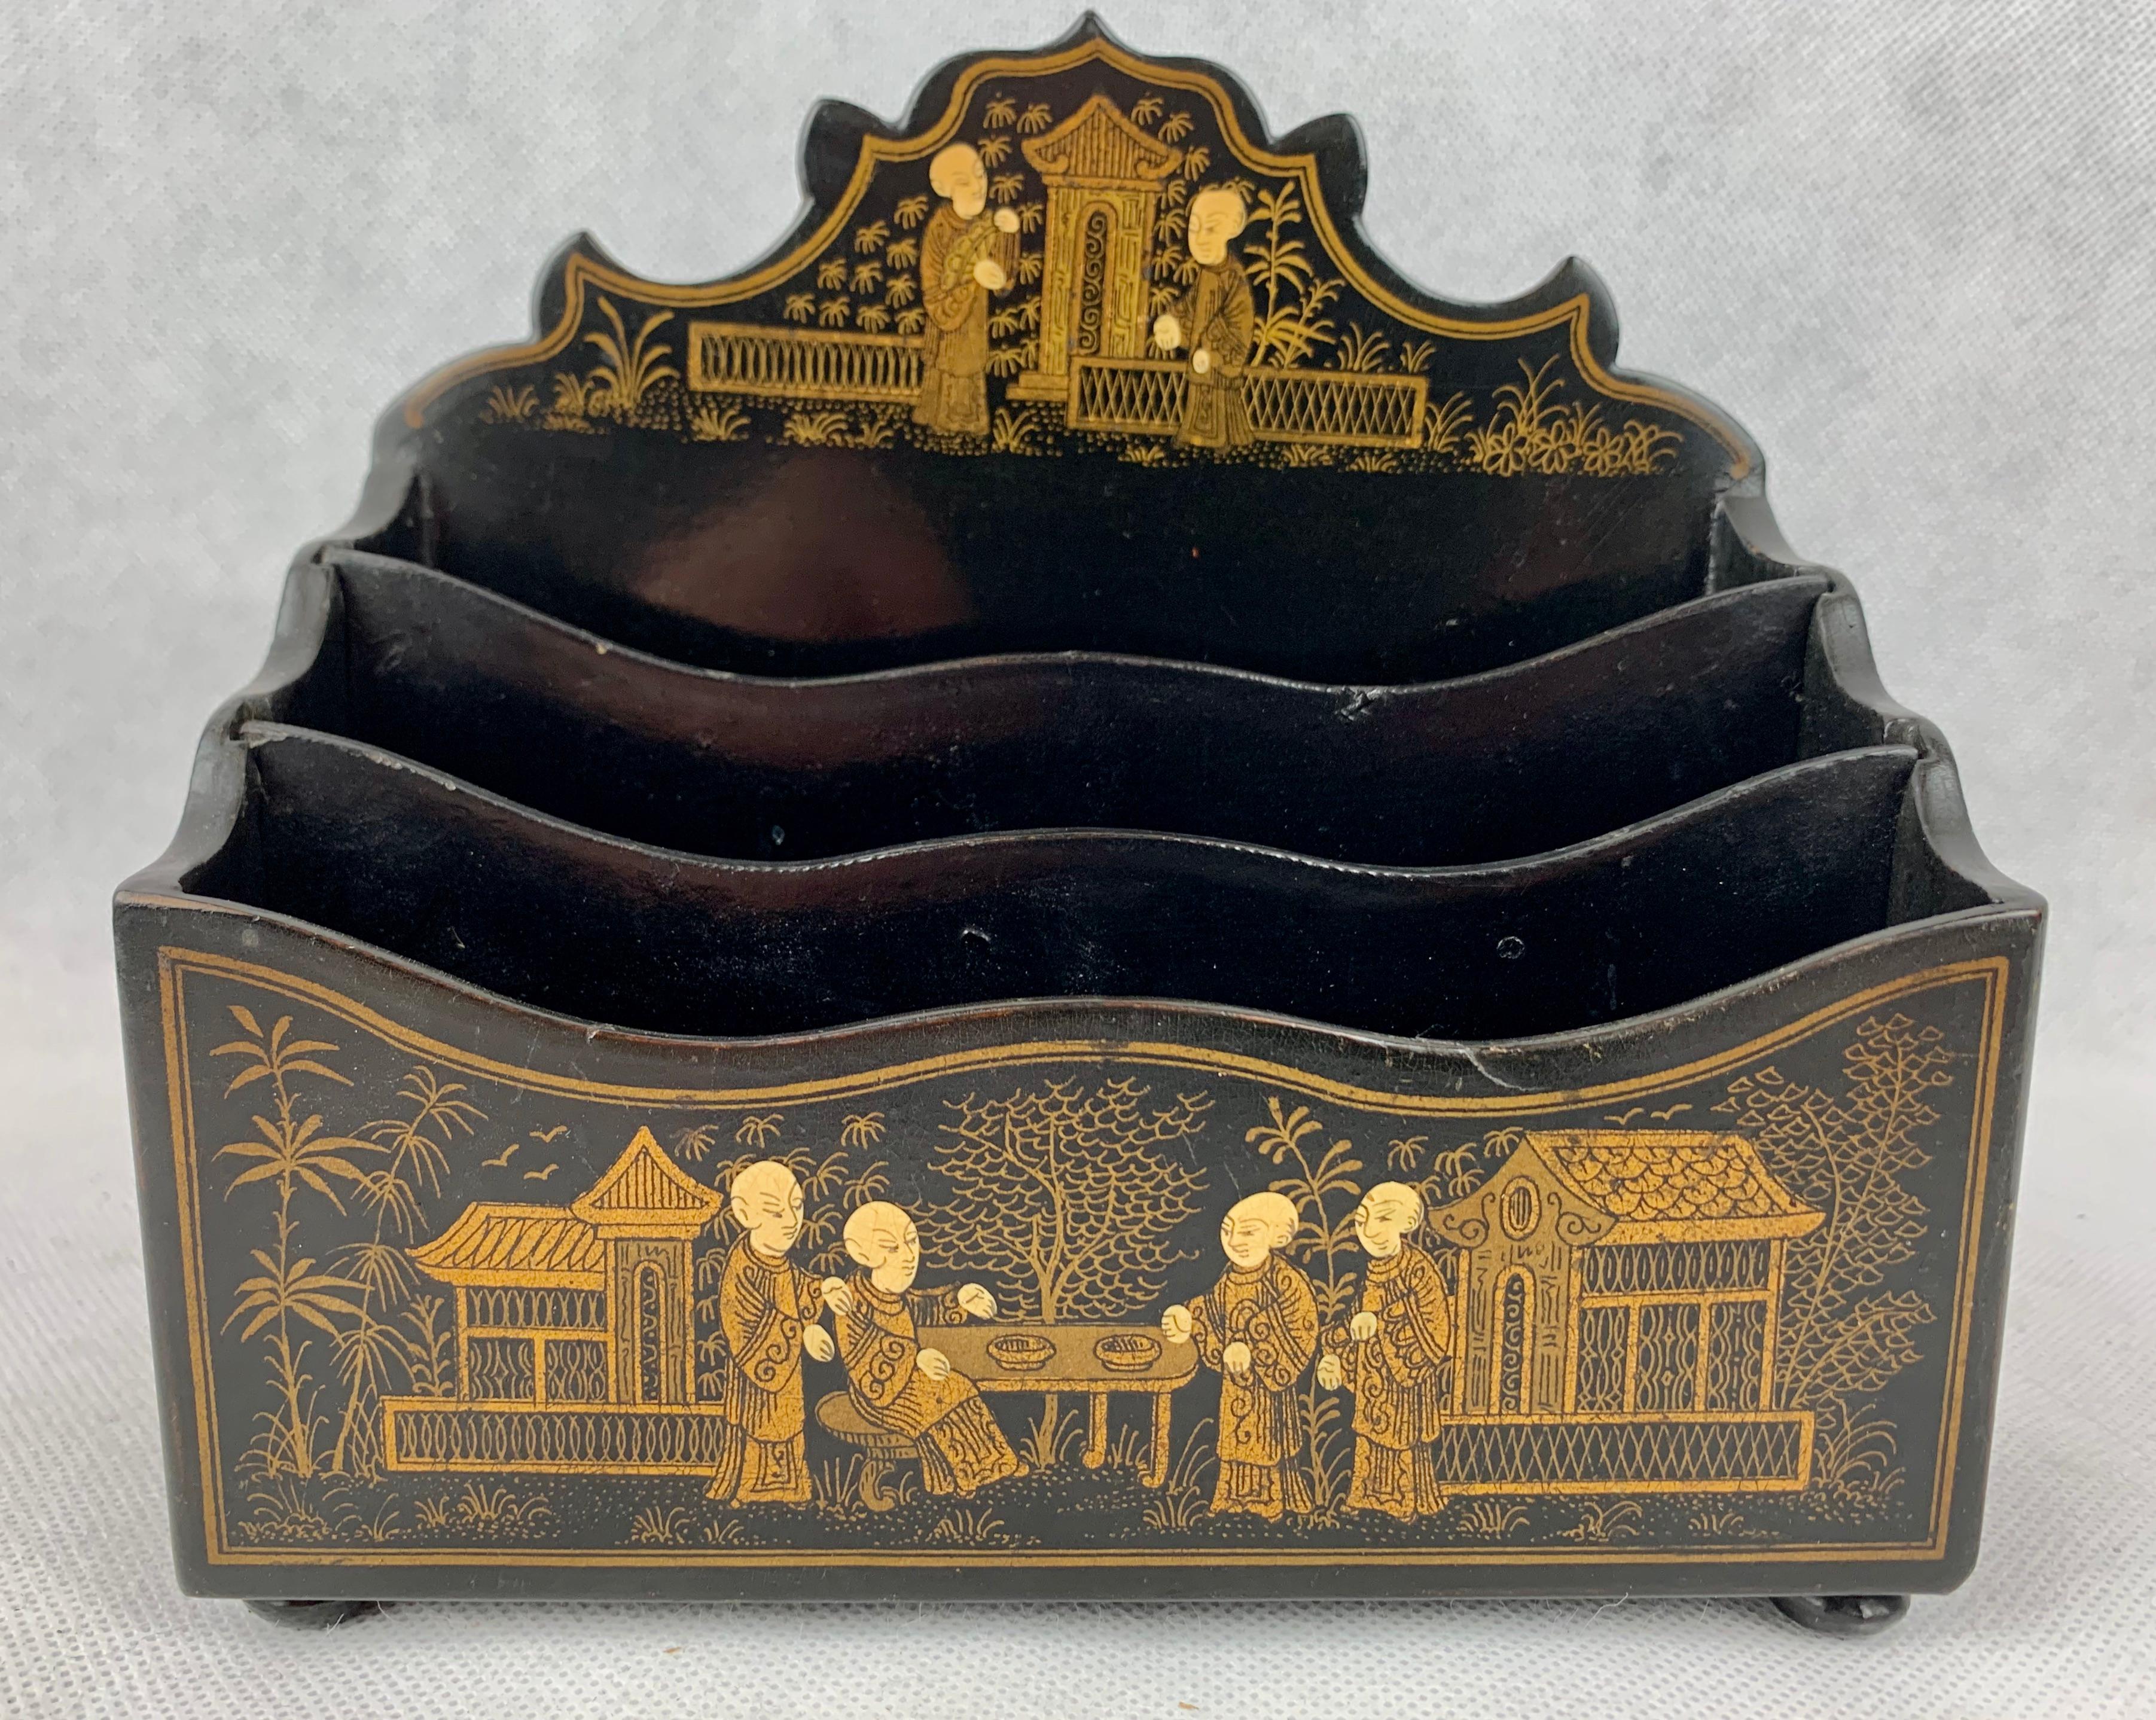 Antique letter holder of black lacquered papier mâché. There are two removable dividers for organizational purposes. The letter holder sits on four squashed bun feet. The gilt designs are hand painted. This piece is in very sturdy condition and very